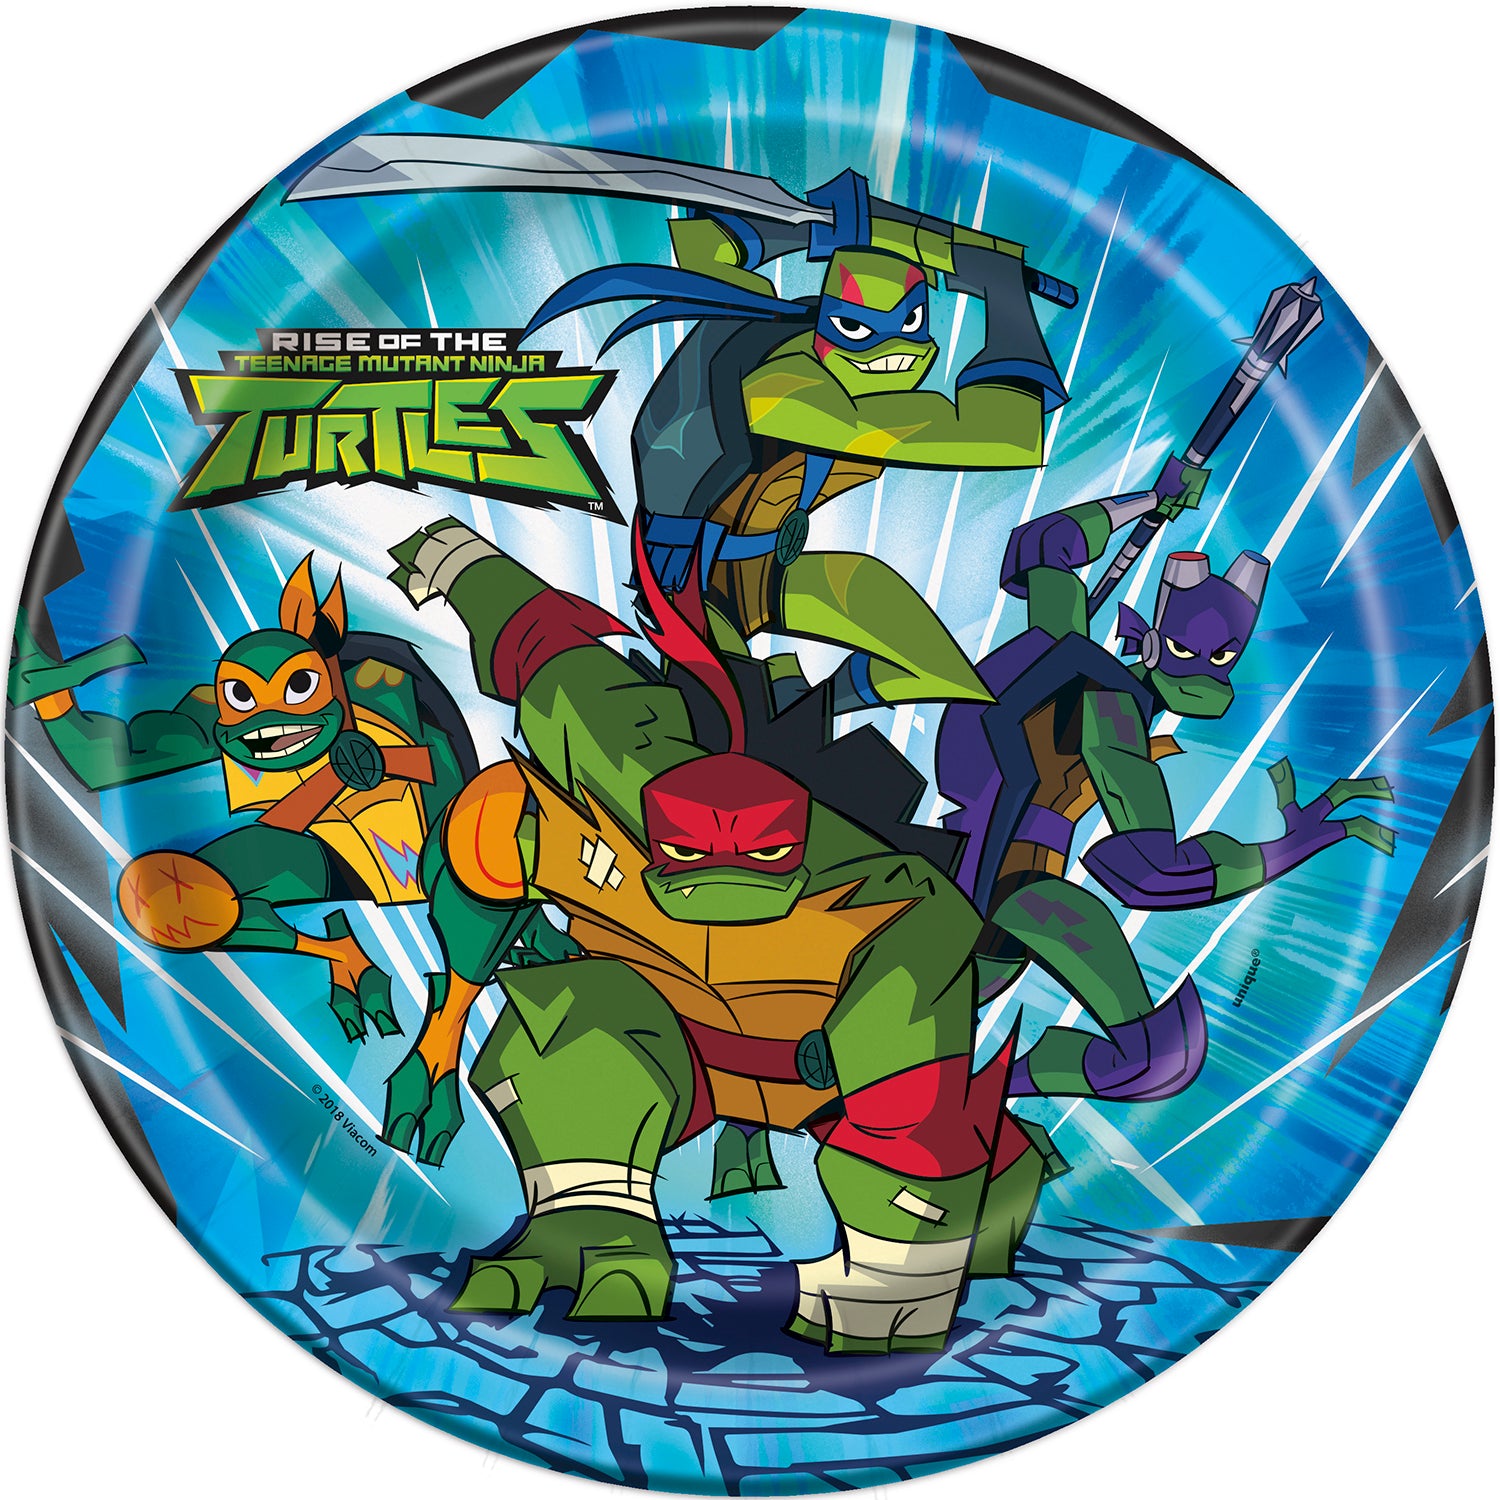 Rise of the Teenage Mutant Ninja Turtles 9 Inch Party Lunch Plates [8 per Pack]